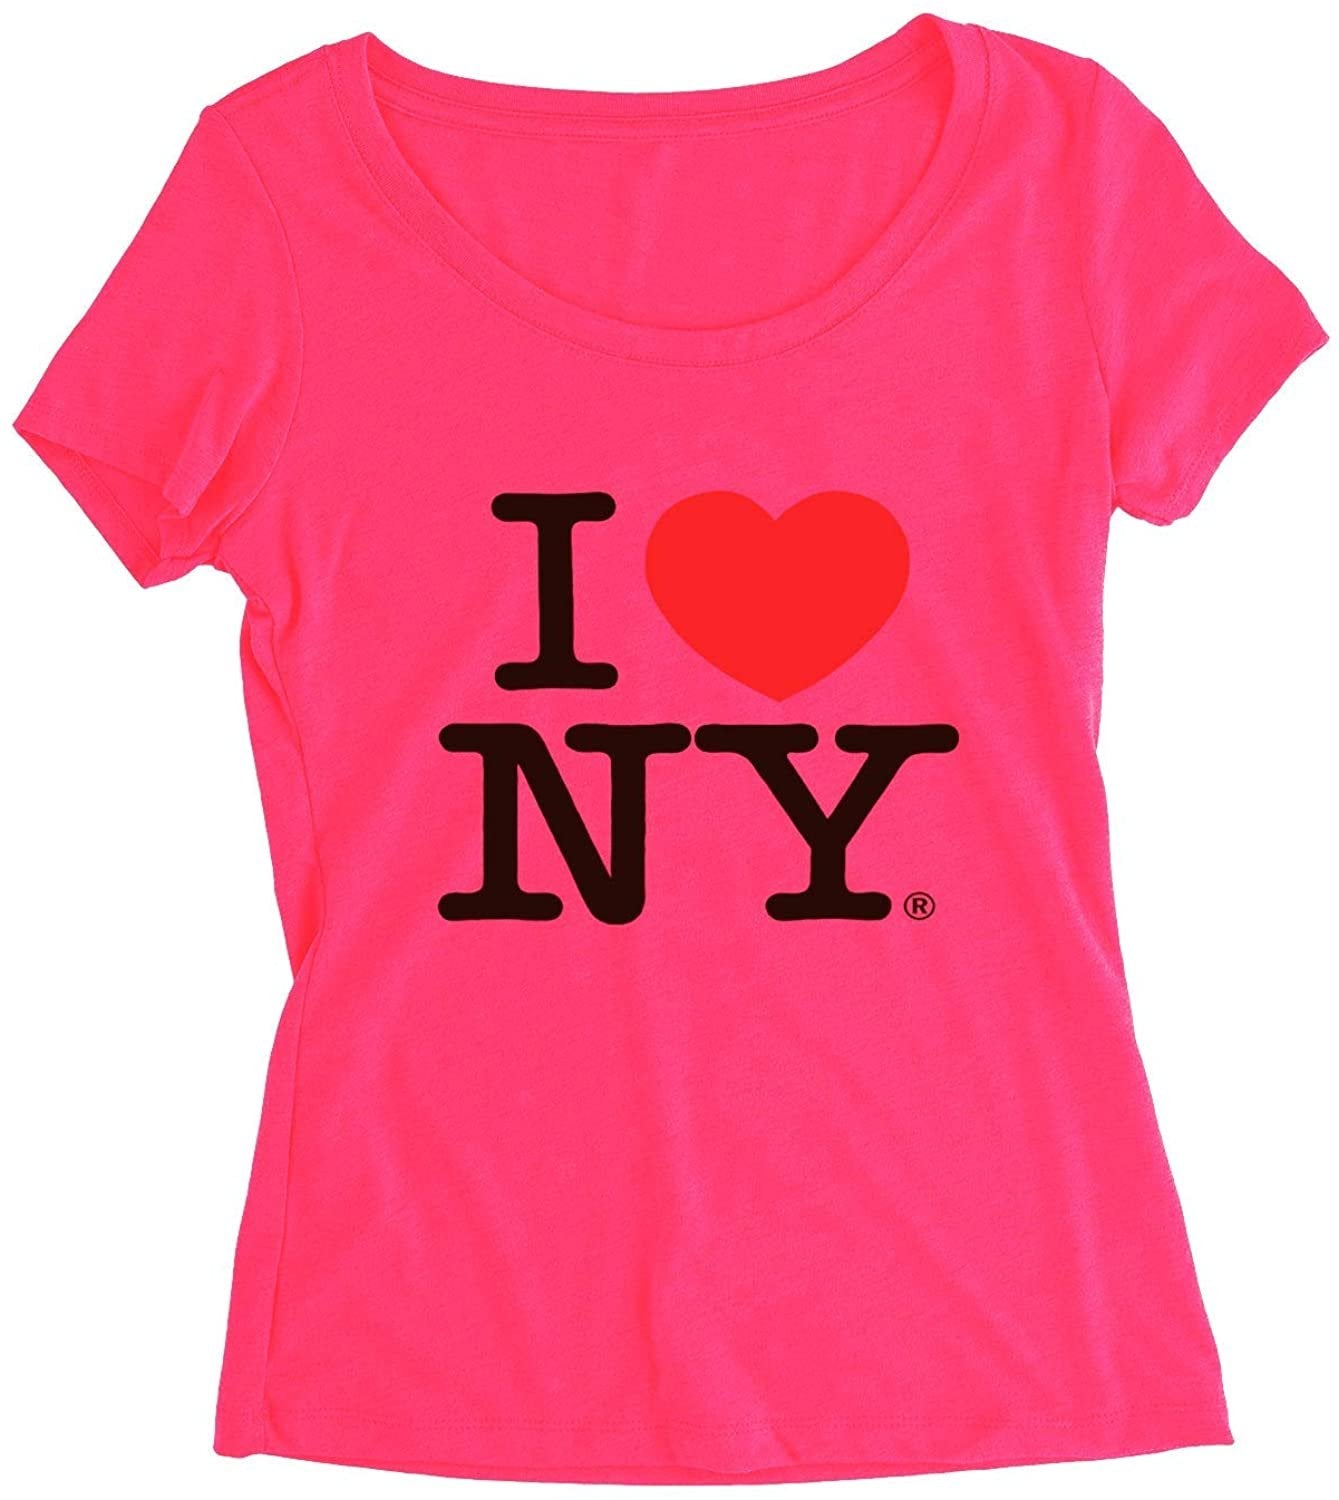 I Love NY Neon Teens/Ladies Scoop Neck T-Shirt Tee Officially Licensed Slim Fit